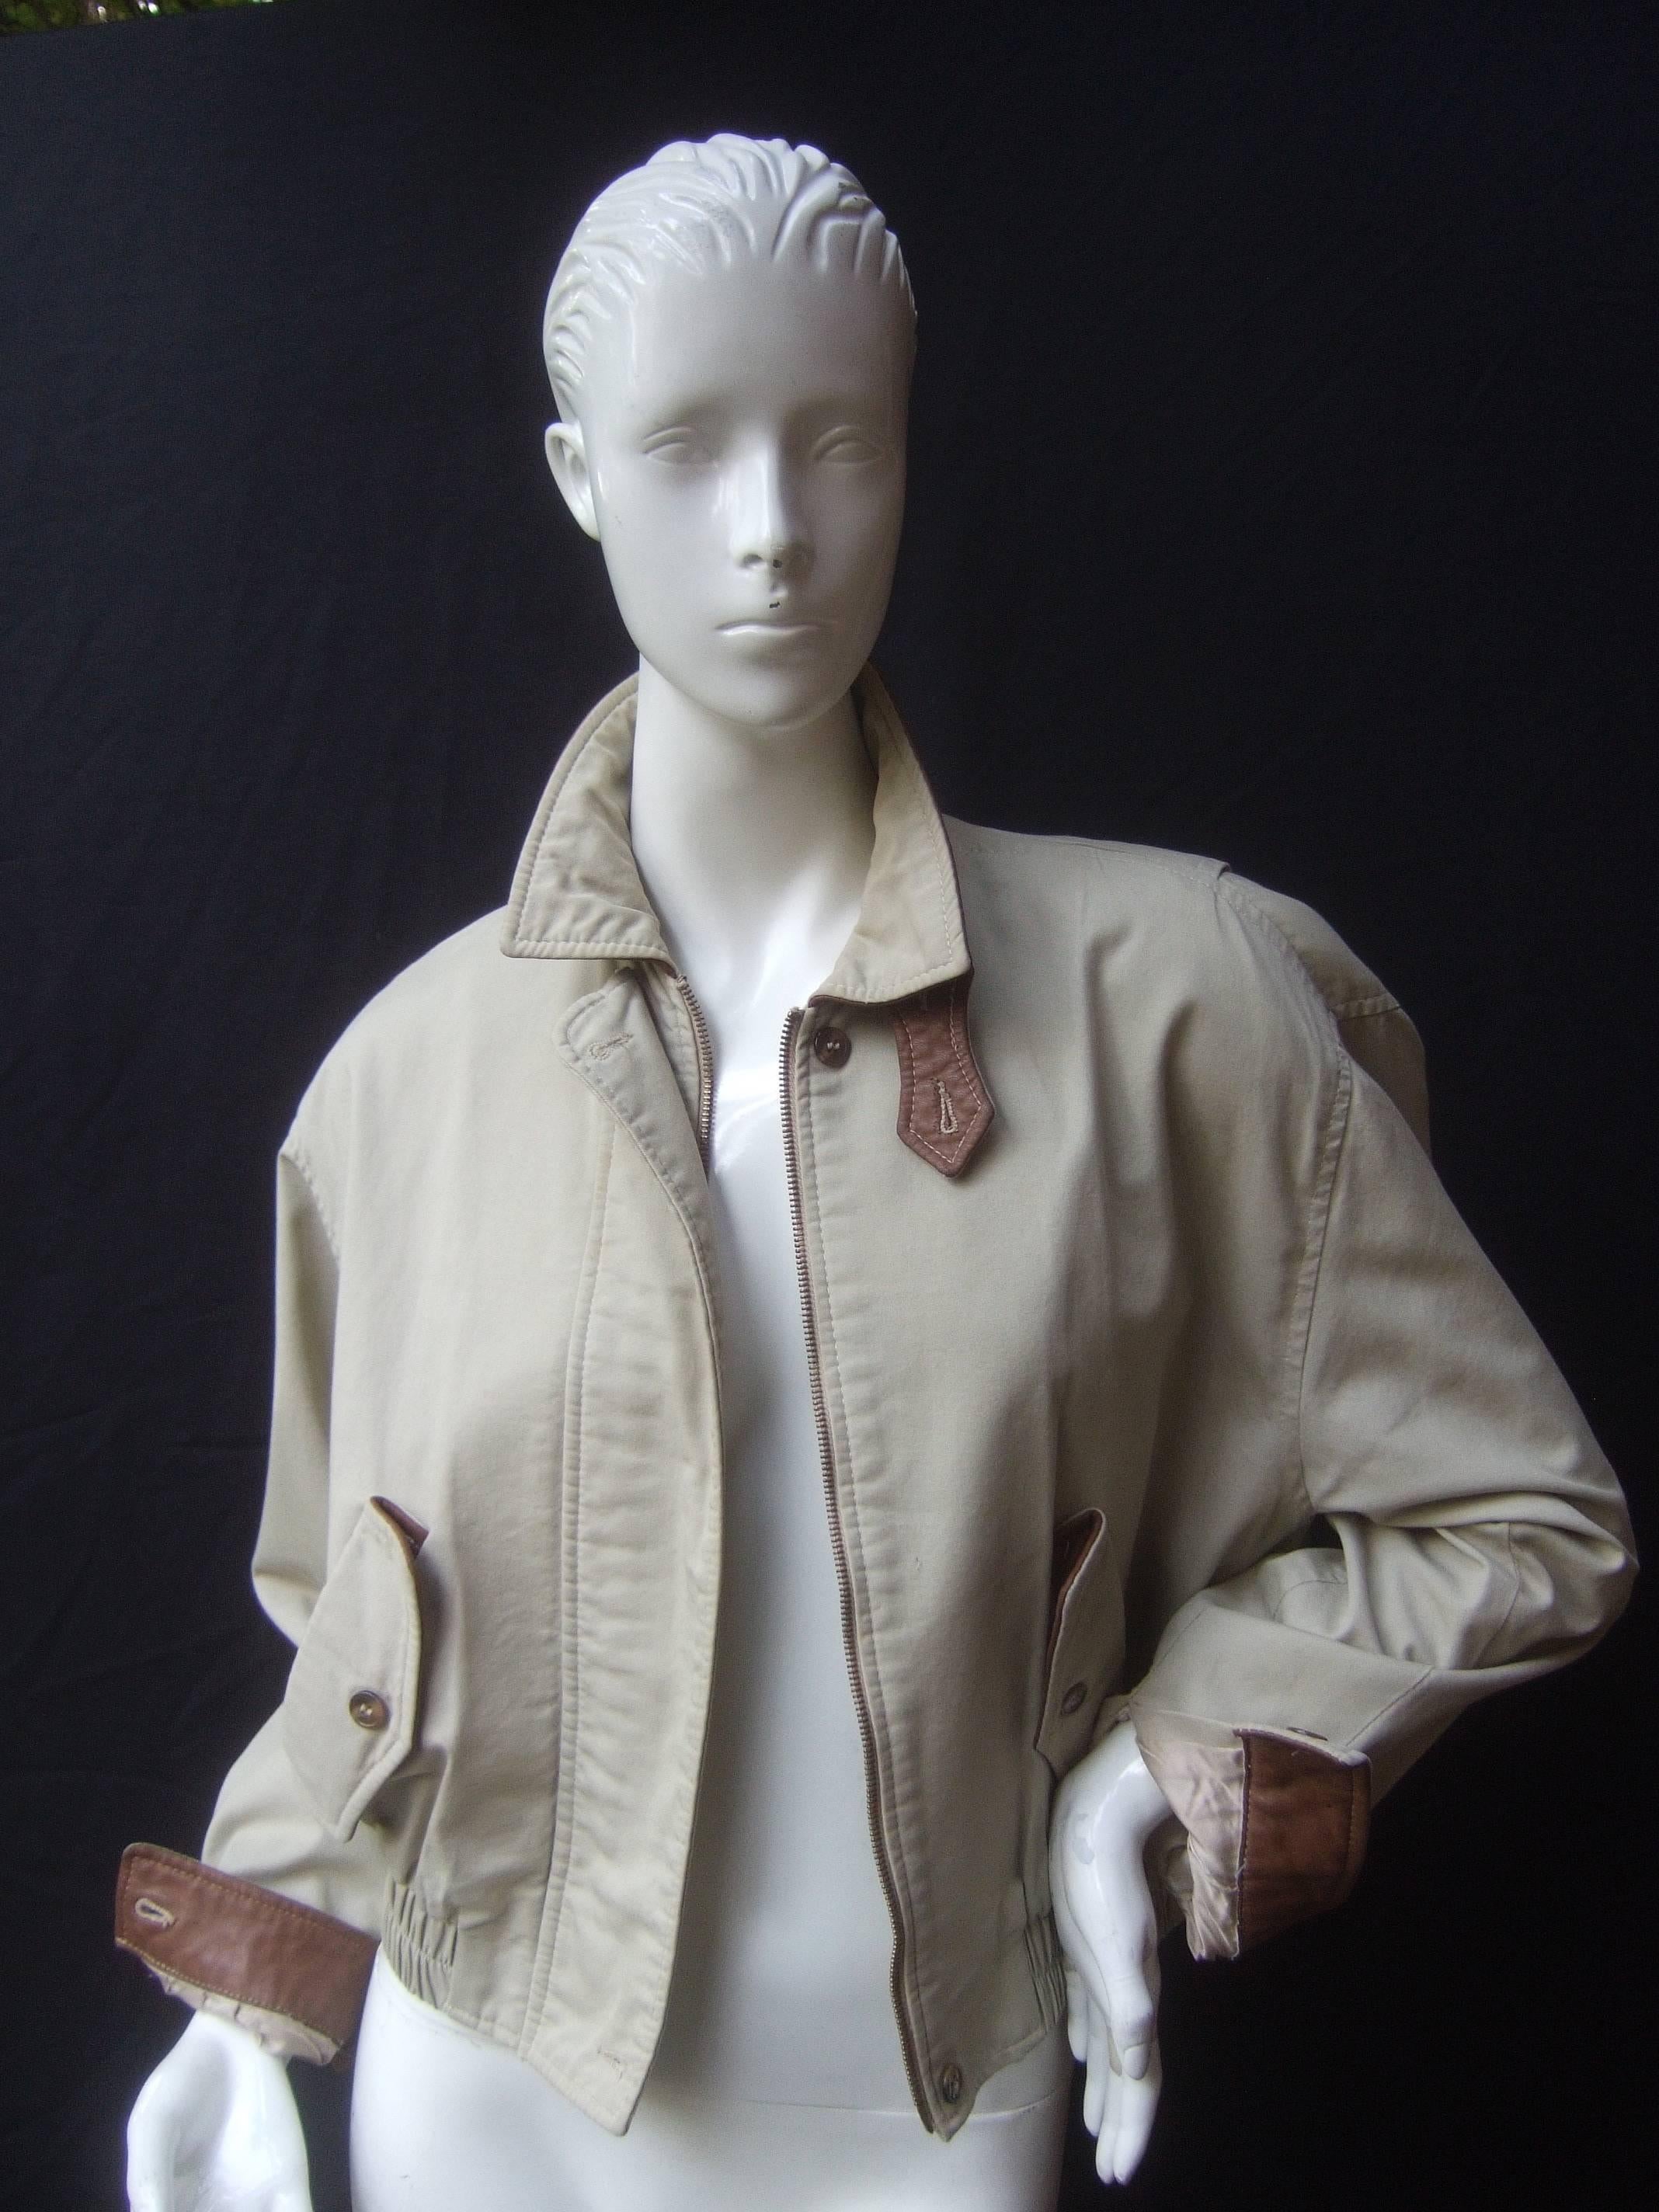 Burberry's London women's Eisenhower style jacket c 1980s
The classic tan cotton jacket is accented with a brown
leather lined collar. The sleeve cuffs are also lined with
brown leather. The collar and cuffs can be folded to 
revel the brown